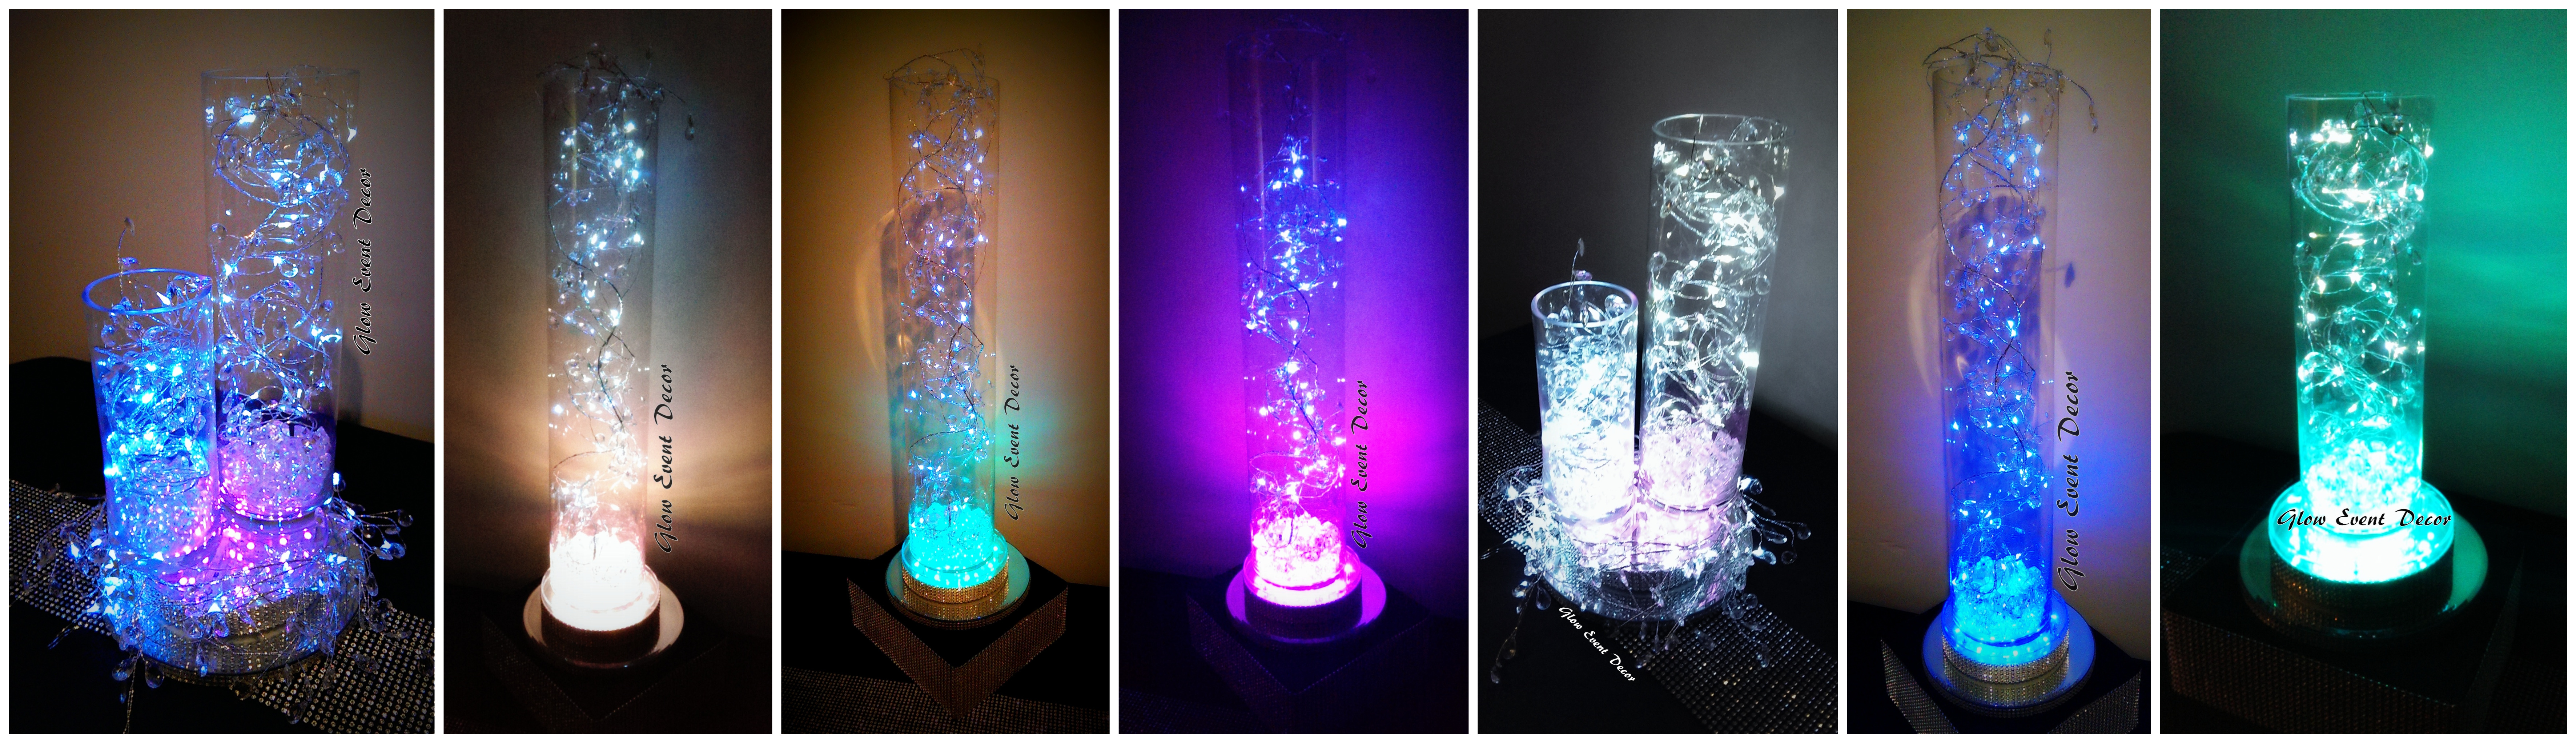 selection of LED light up cylinder vase table decorations centrepieces for hire from glow event decor